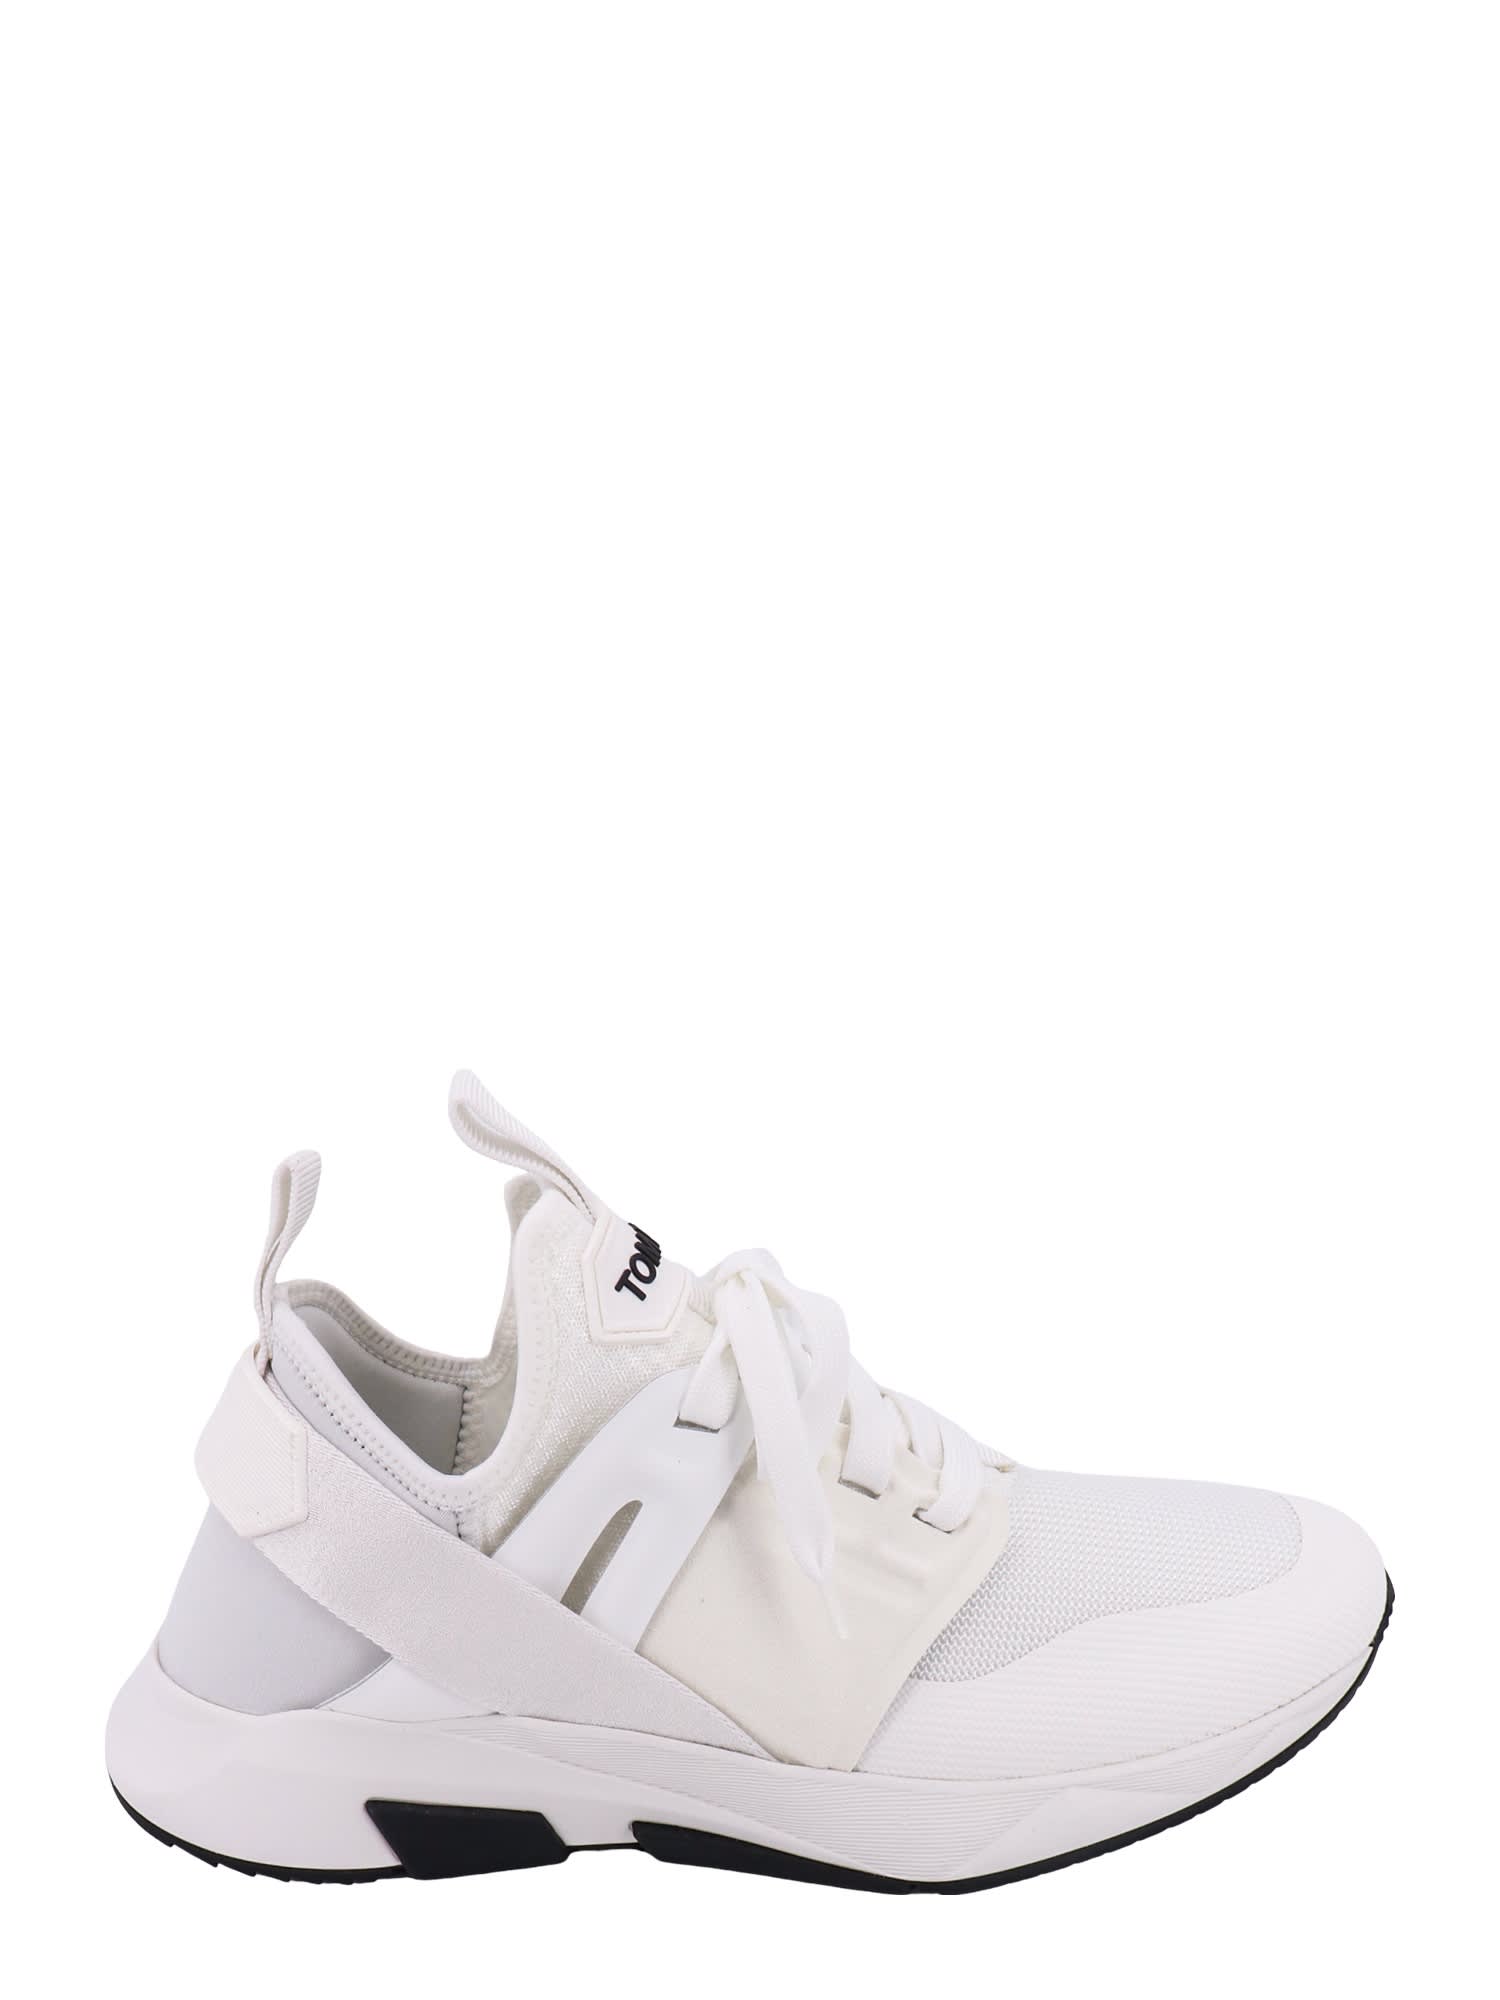 Tom Ford Jago Trainers In White